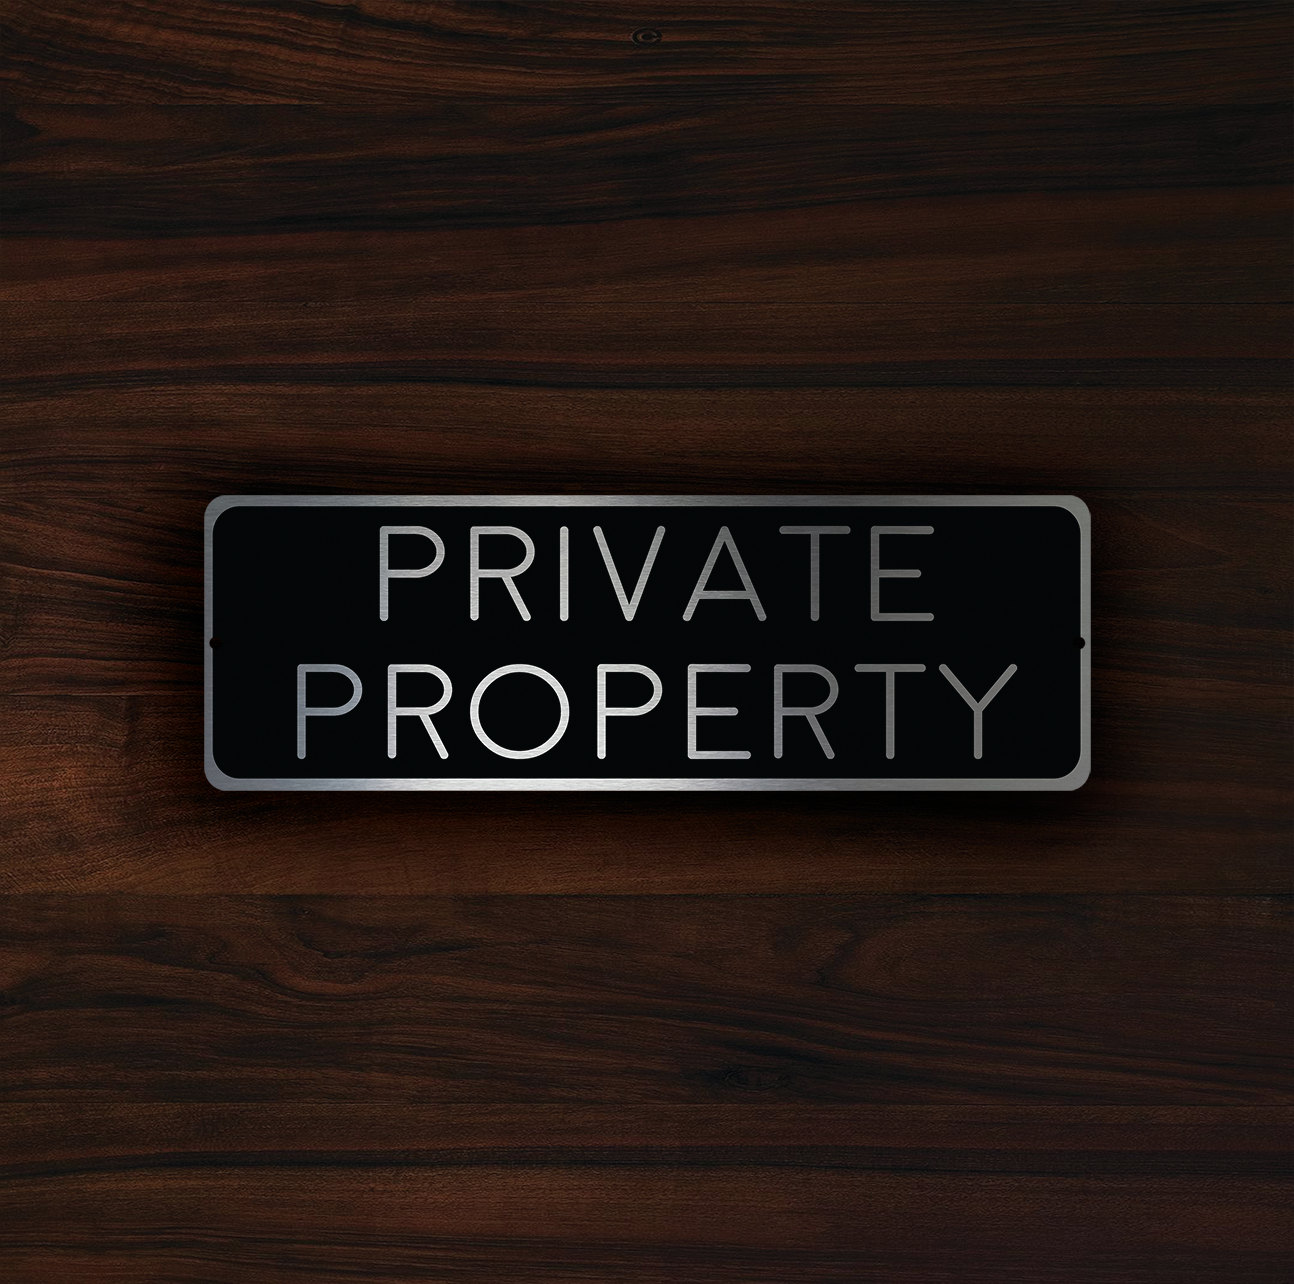 PRIVATE-PROPERTY-SIGN-1